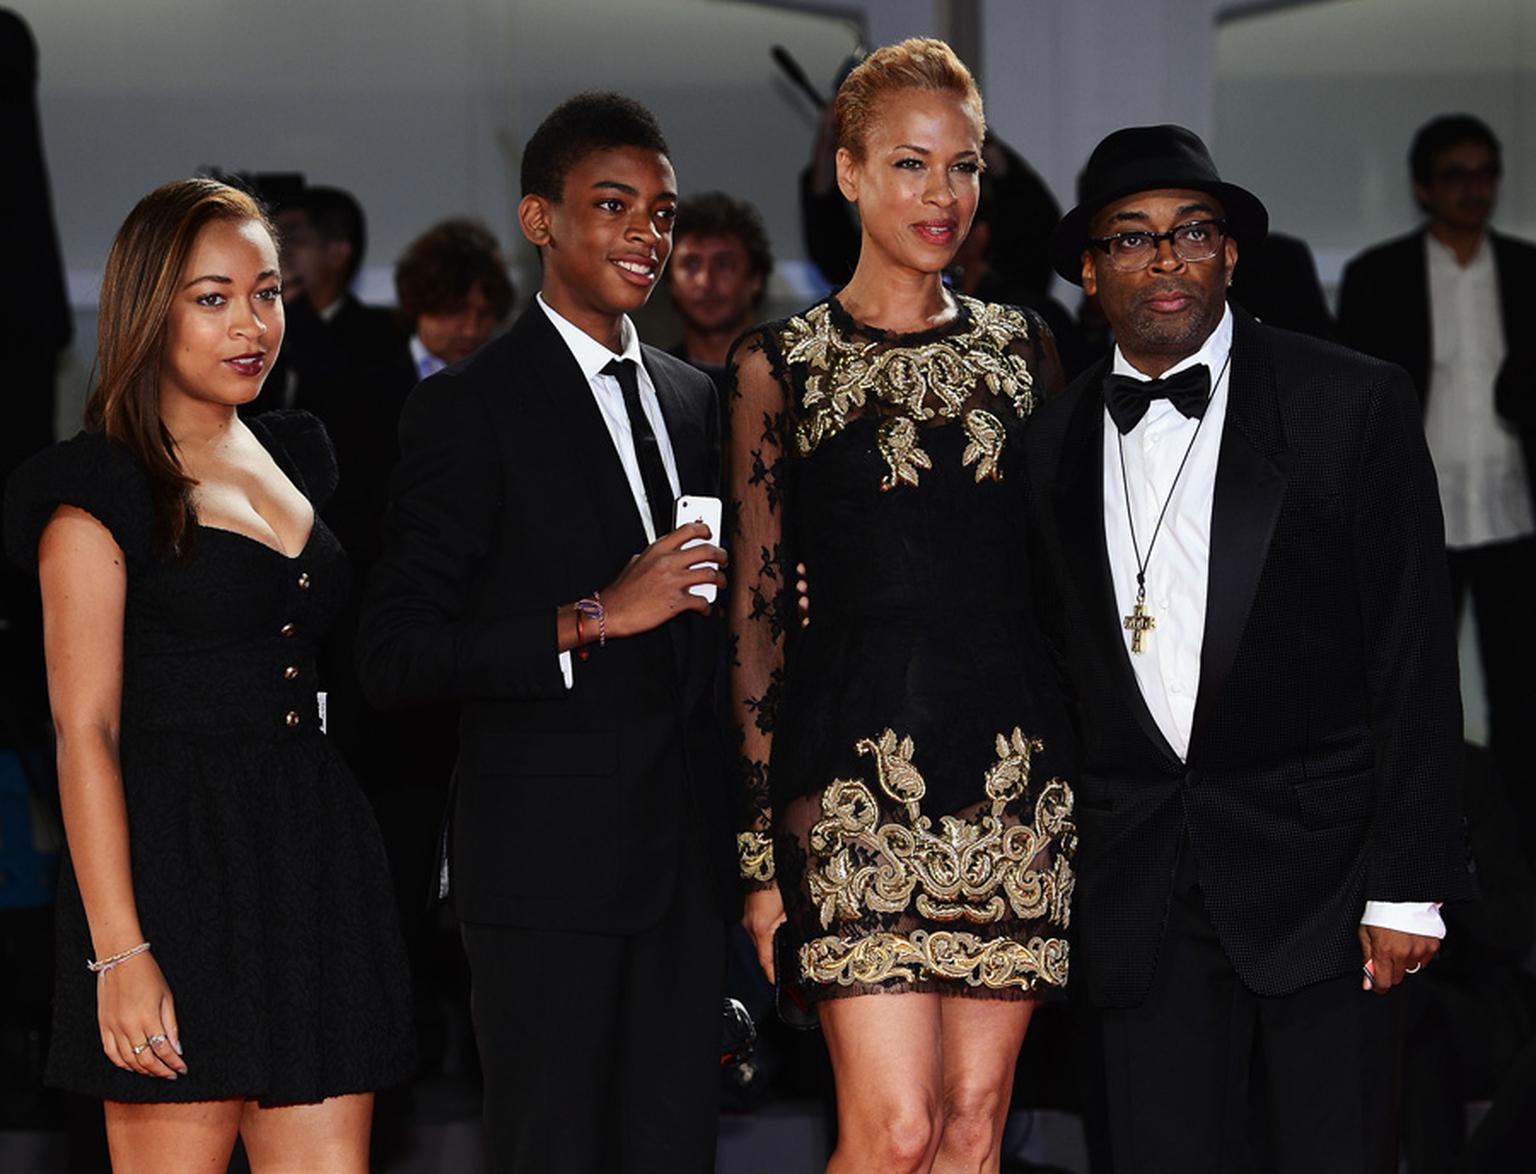 JLC-Director-Spike-Lee-and-his-daughter-Satchel-Lee-son-Jackson-Lee-and-wife-Tonya-Lewis-attend-the-Bad-and-Jaeger-Le-Coultre--Glory-To-The-Filmmaker-2012-Award-during-the-69th-Venice-Film-Festival.jpg